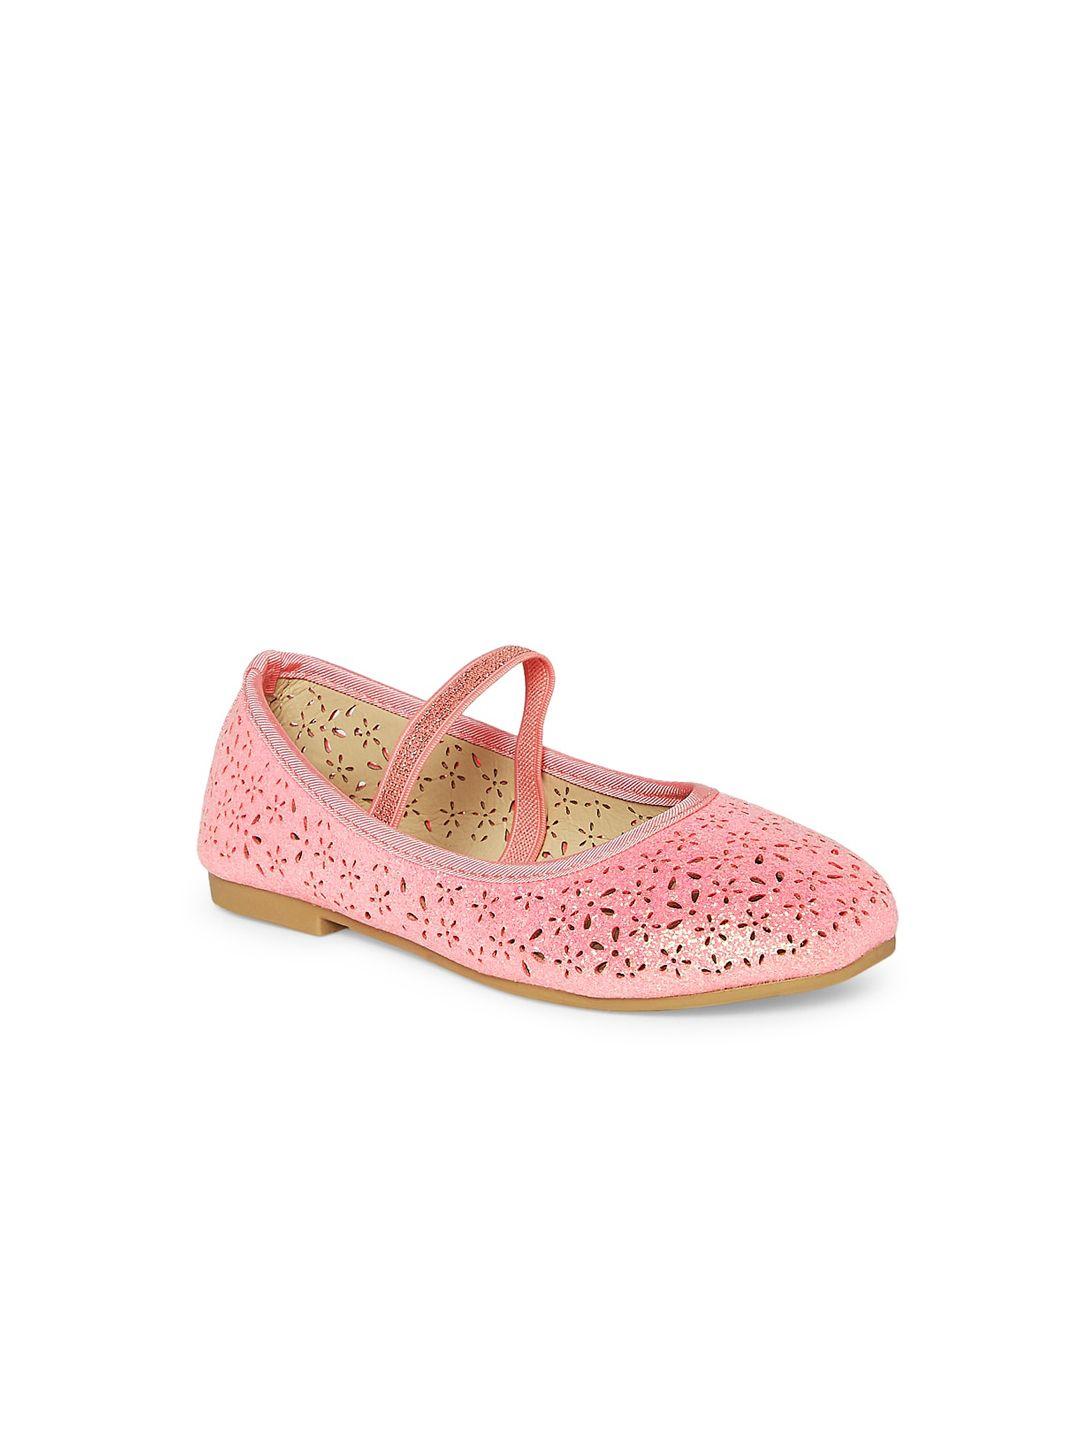 pantaloons junior girls coral embellished leather party ballerinas with laser cuts flats